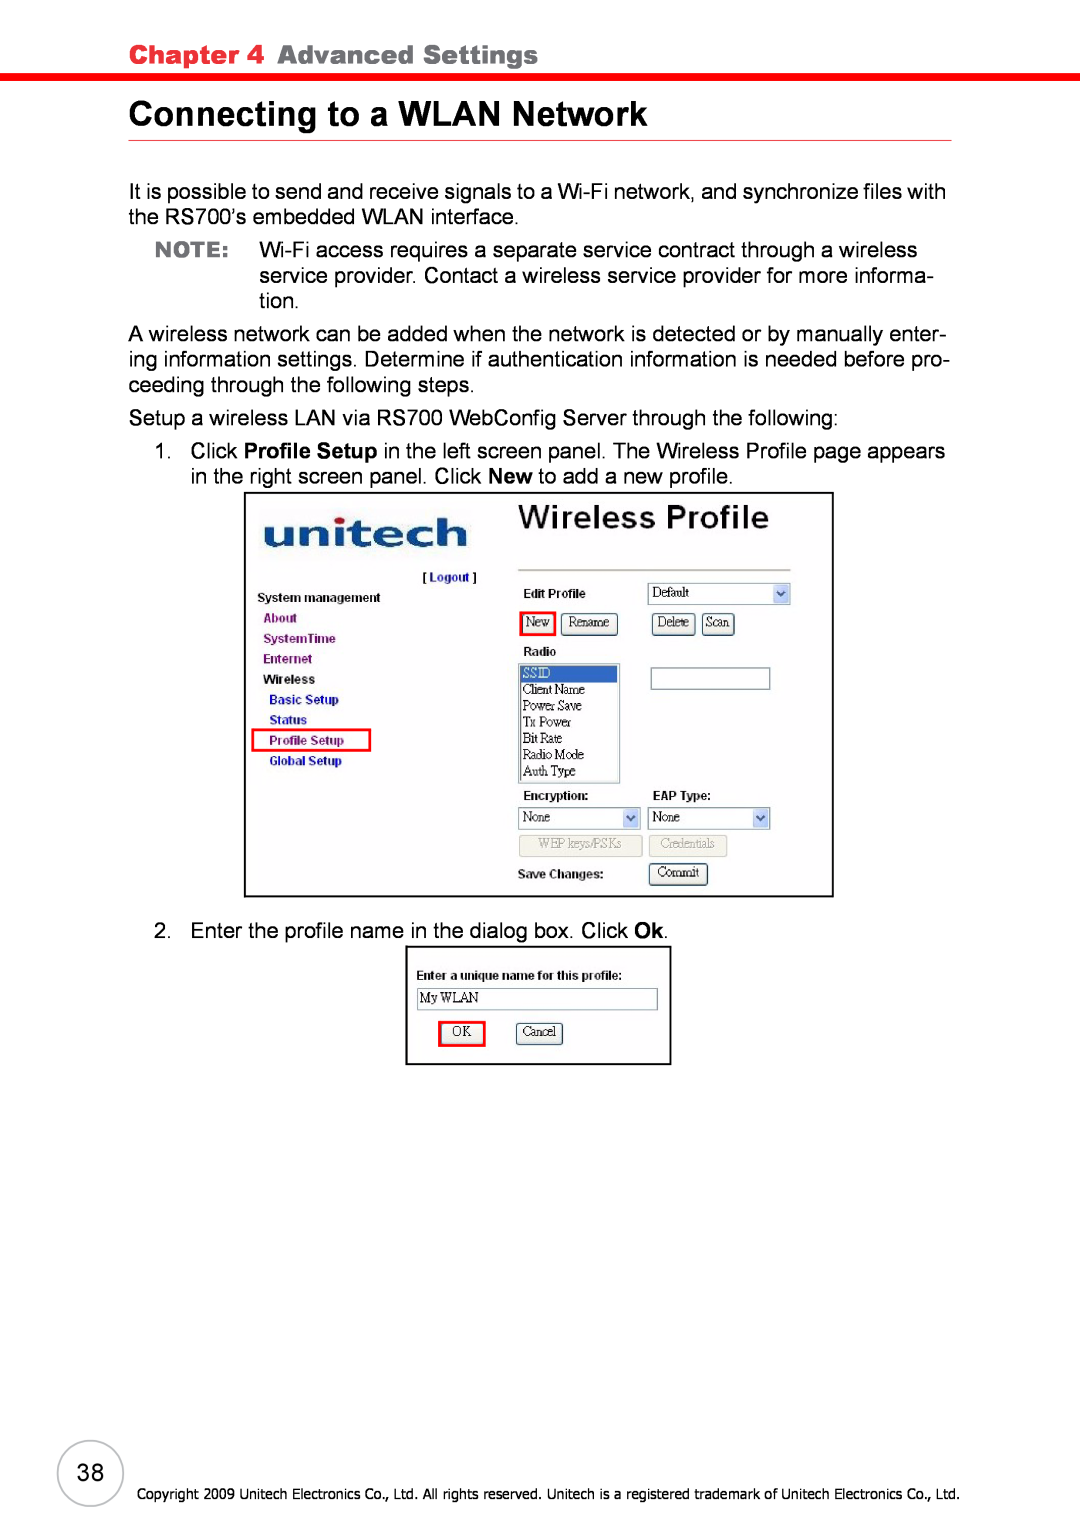 Unitech RS700 user manual Connecting to a WLAN Network, Advanced Settings 